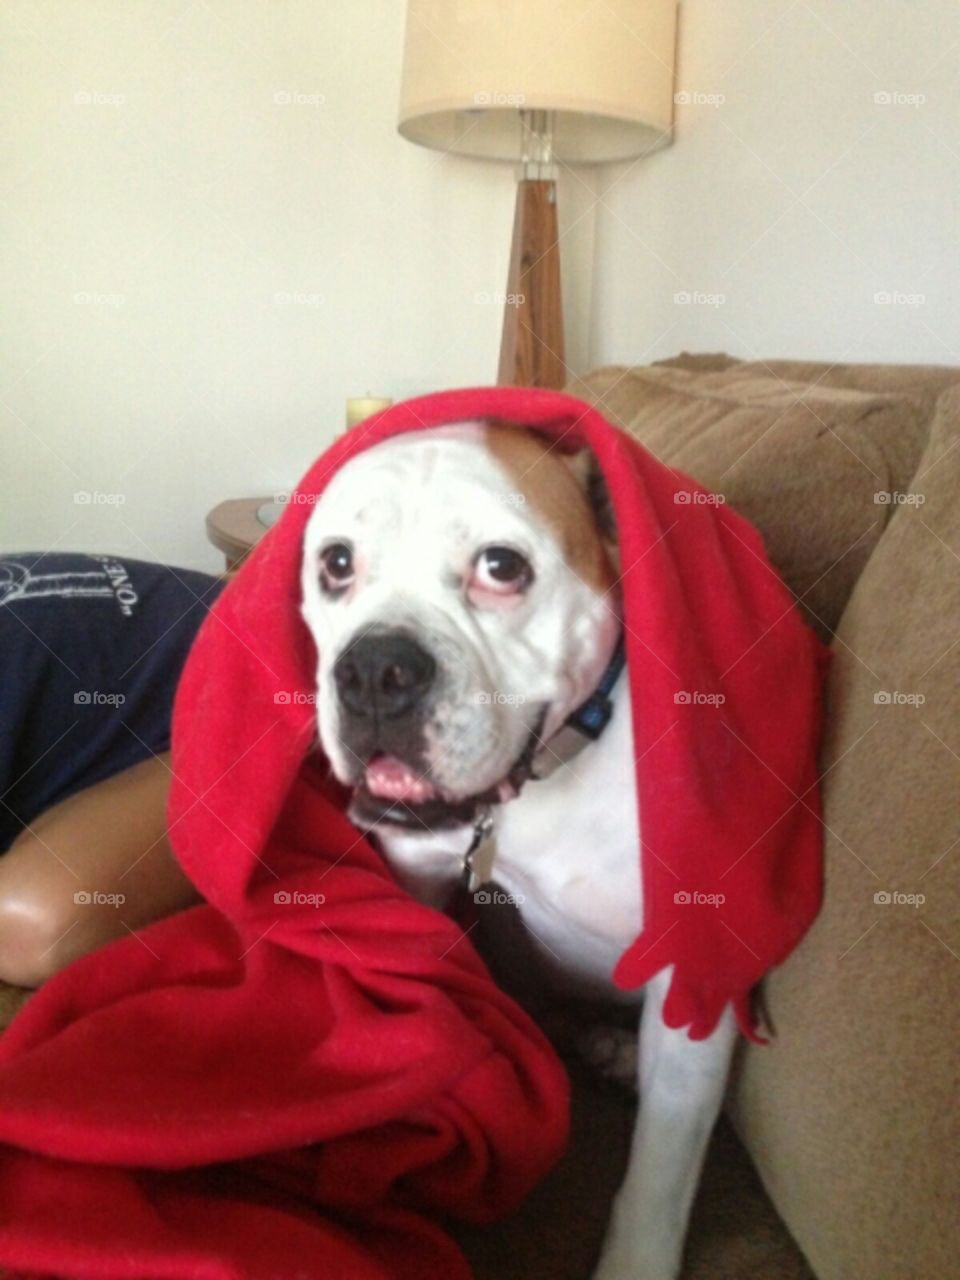 Doggy in his blankie